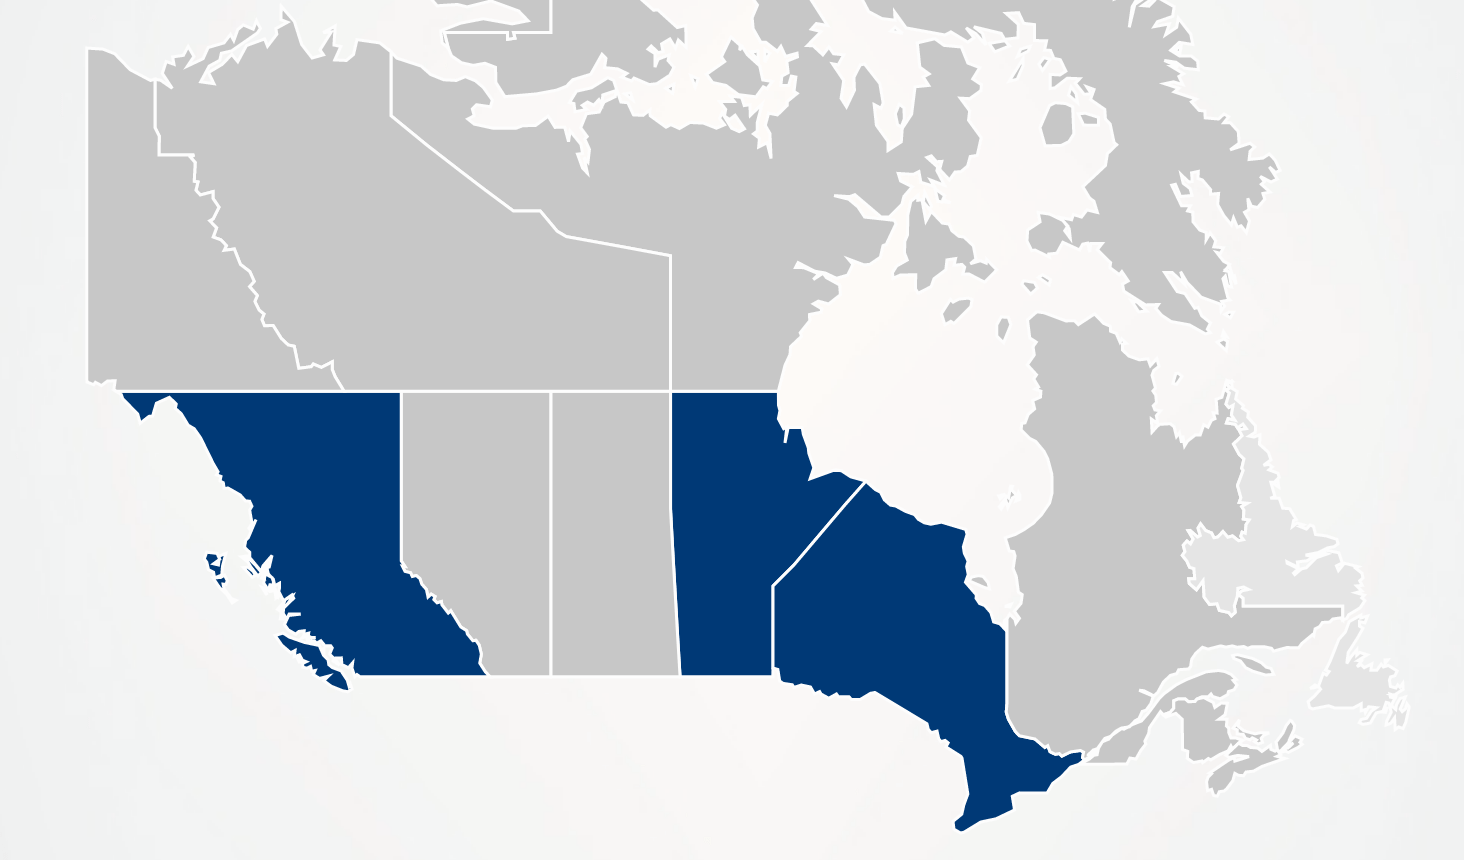 Map of Canada with British Columbia, Manitoba, and Ontario highlighted, indicating where CMEPP participants are located across the country